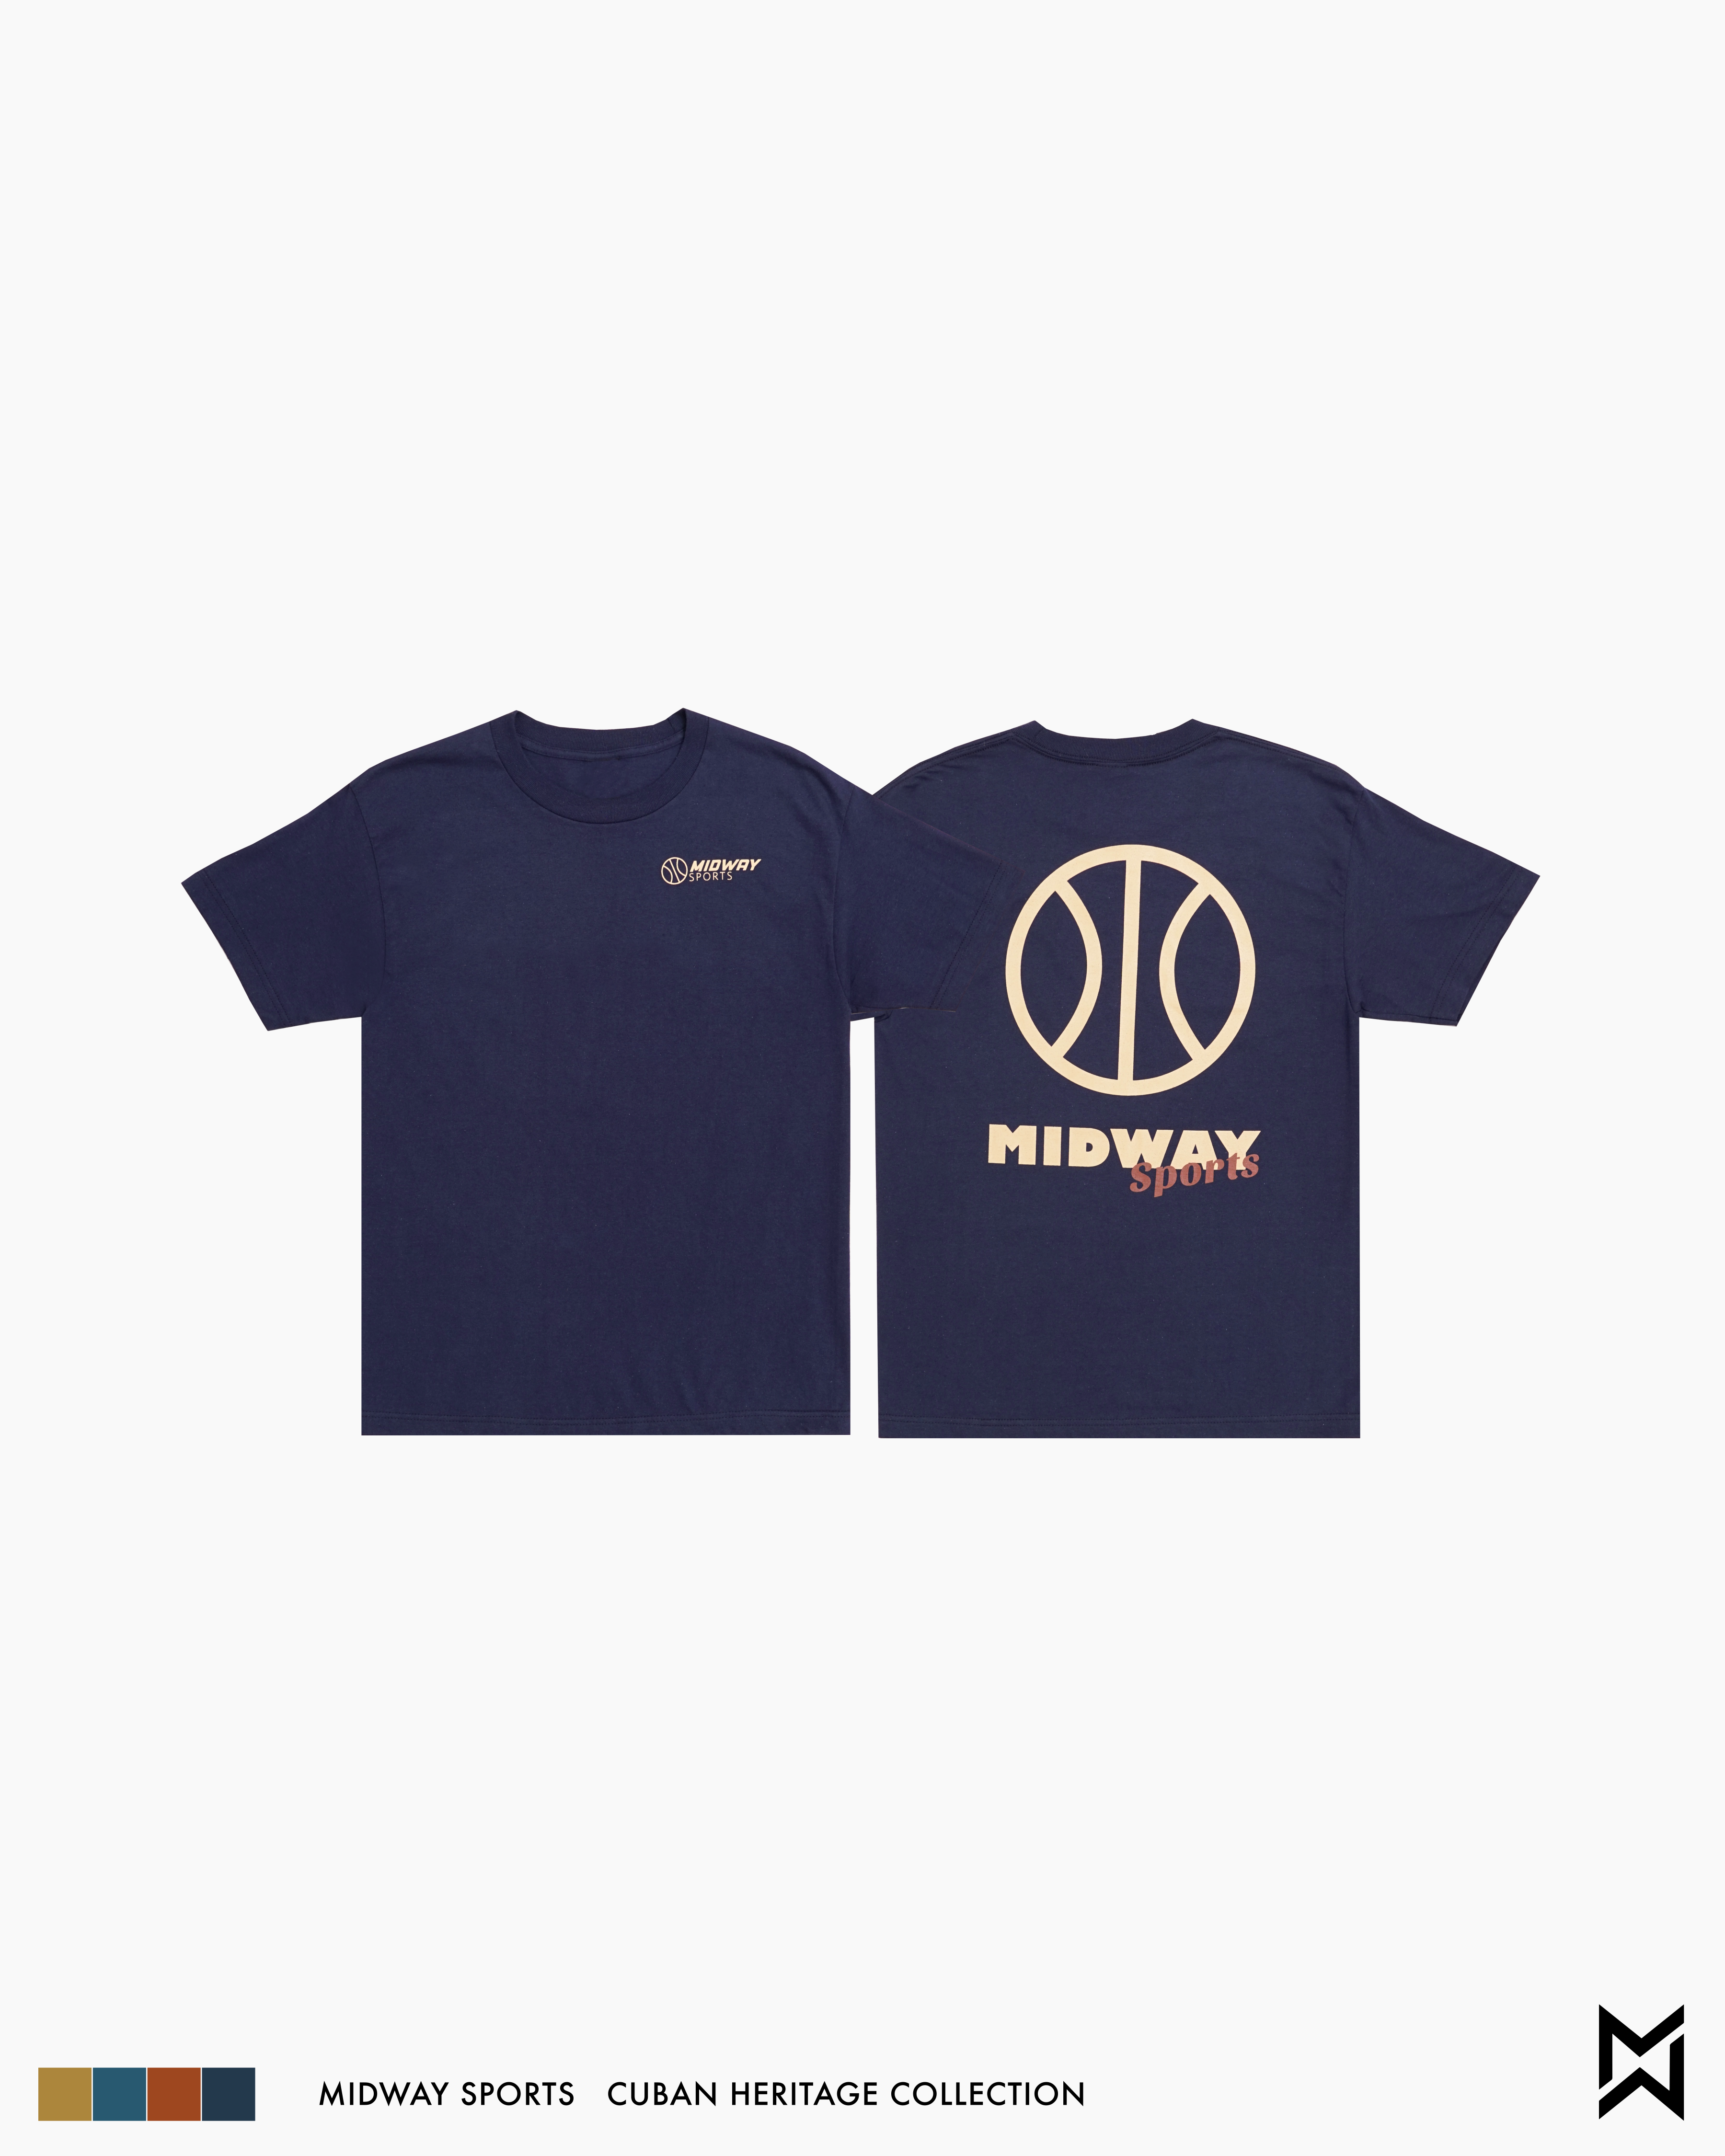 Midway Cuban Heritage Basketball T-Shirt | Midway Sports.